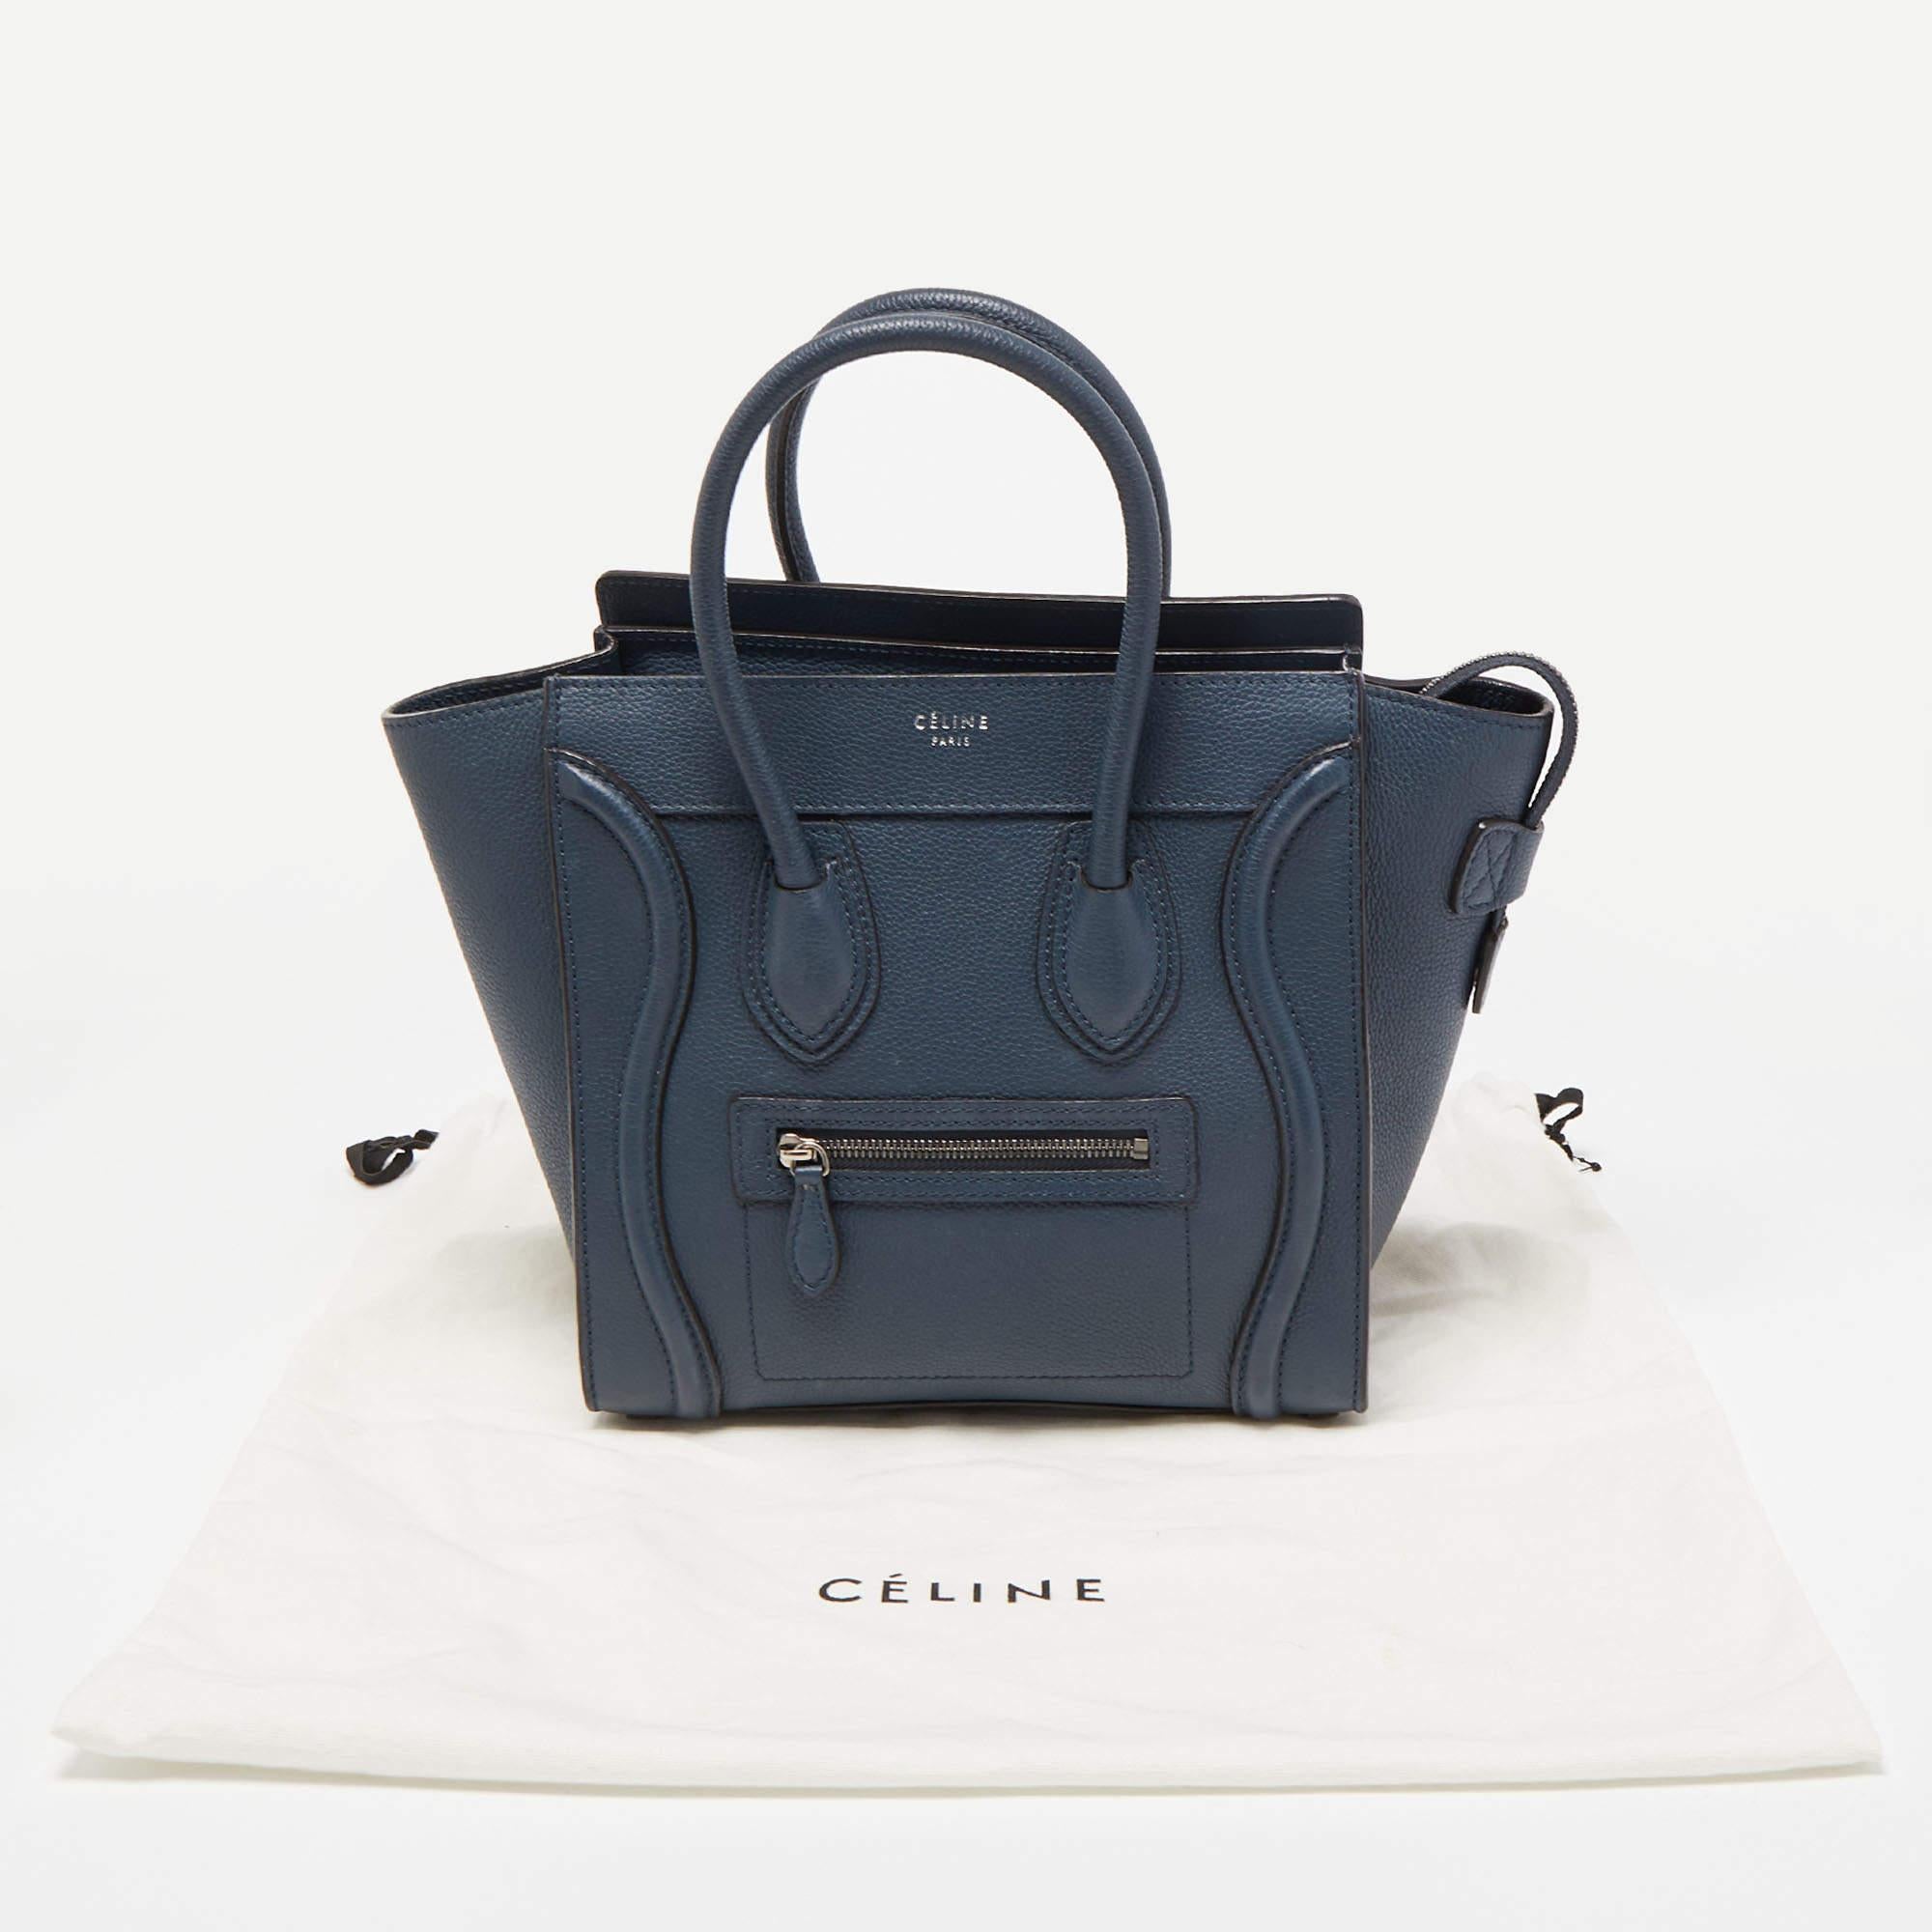 Celine Teal Blue Leather Micro Luggage Tote 12